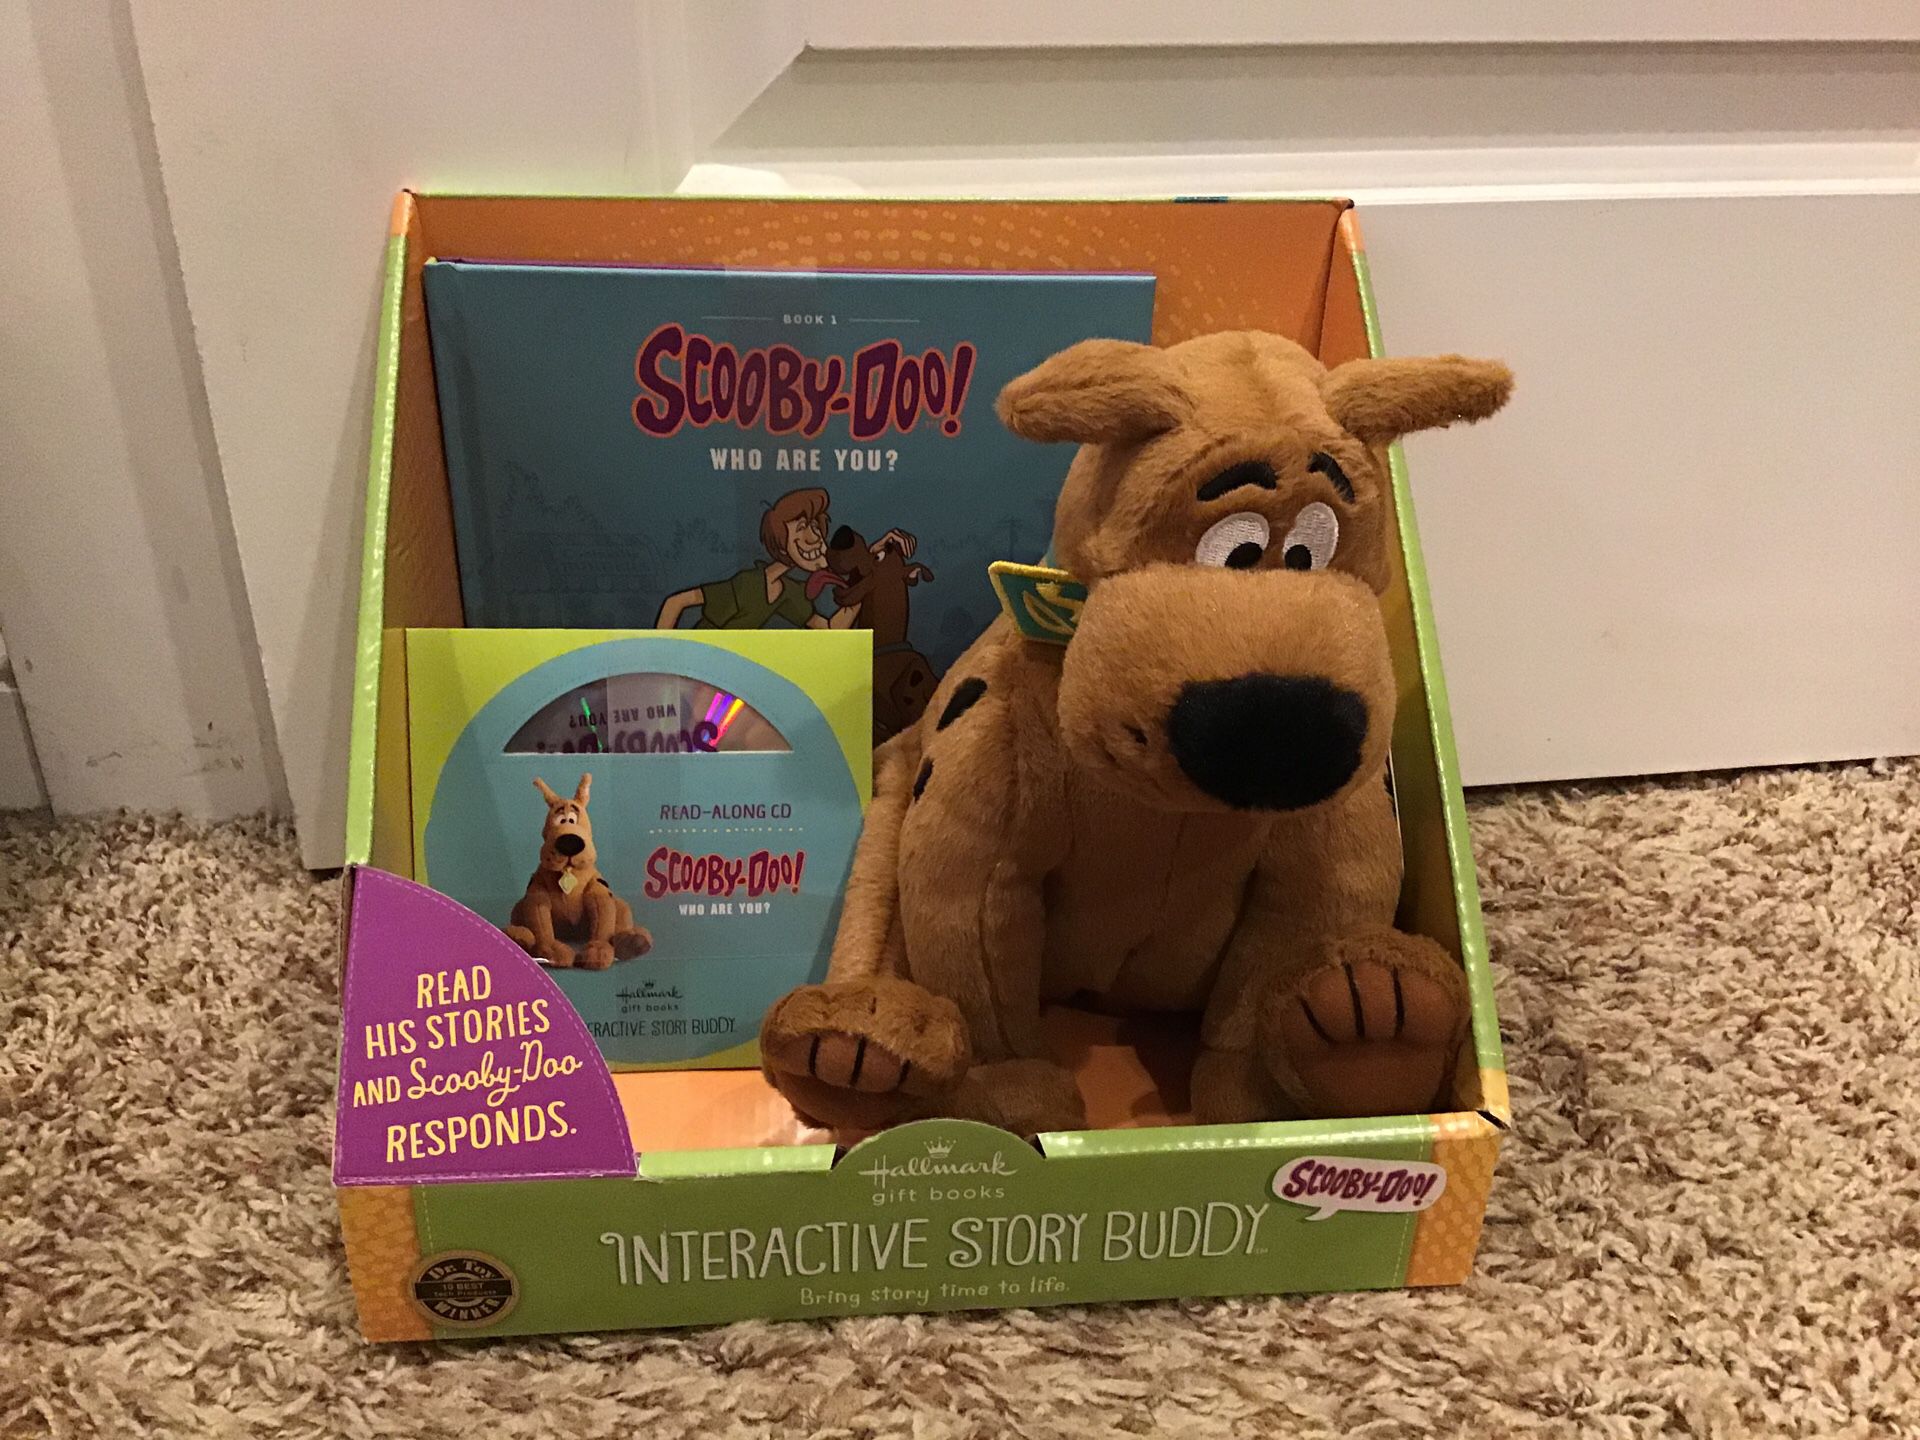 Scooby doo interactive story buddy stuffed animal, book, and cd